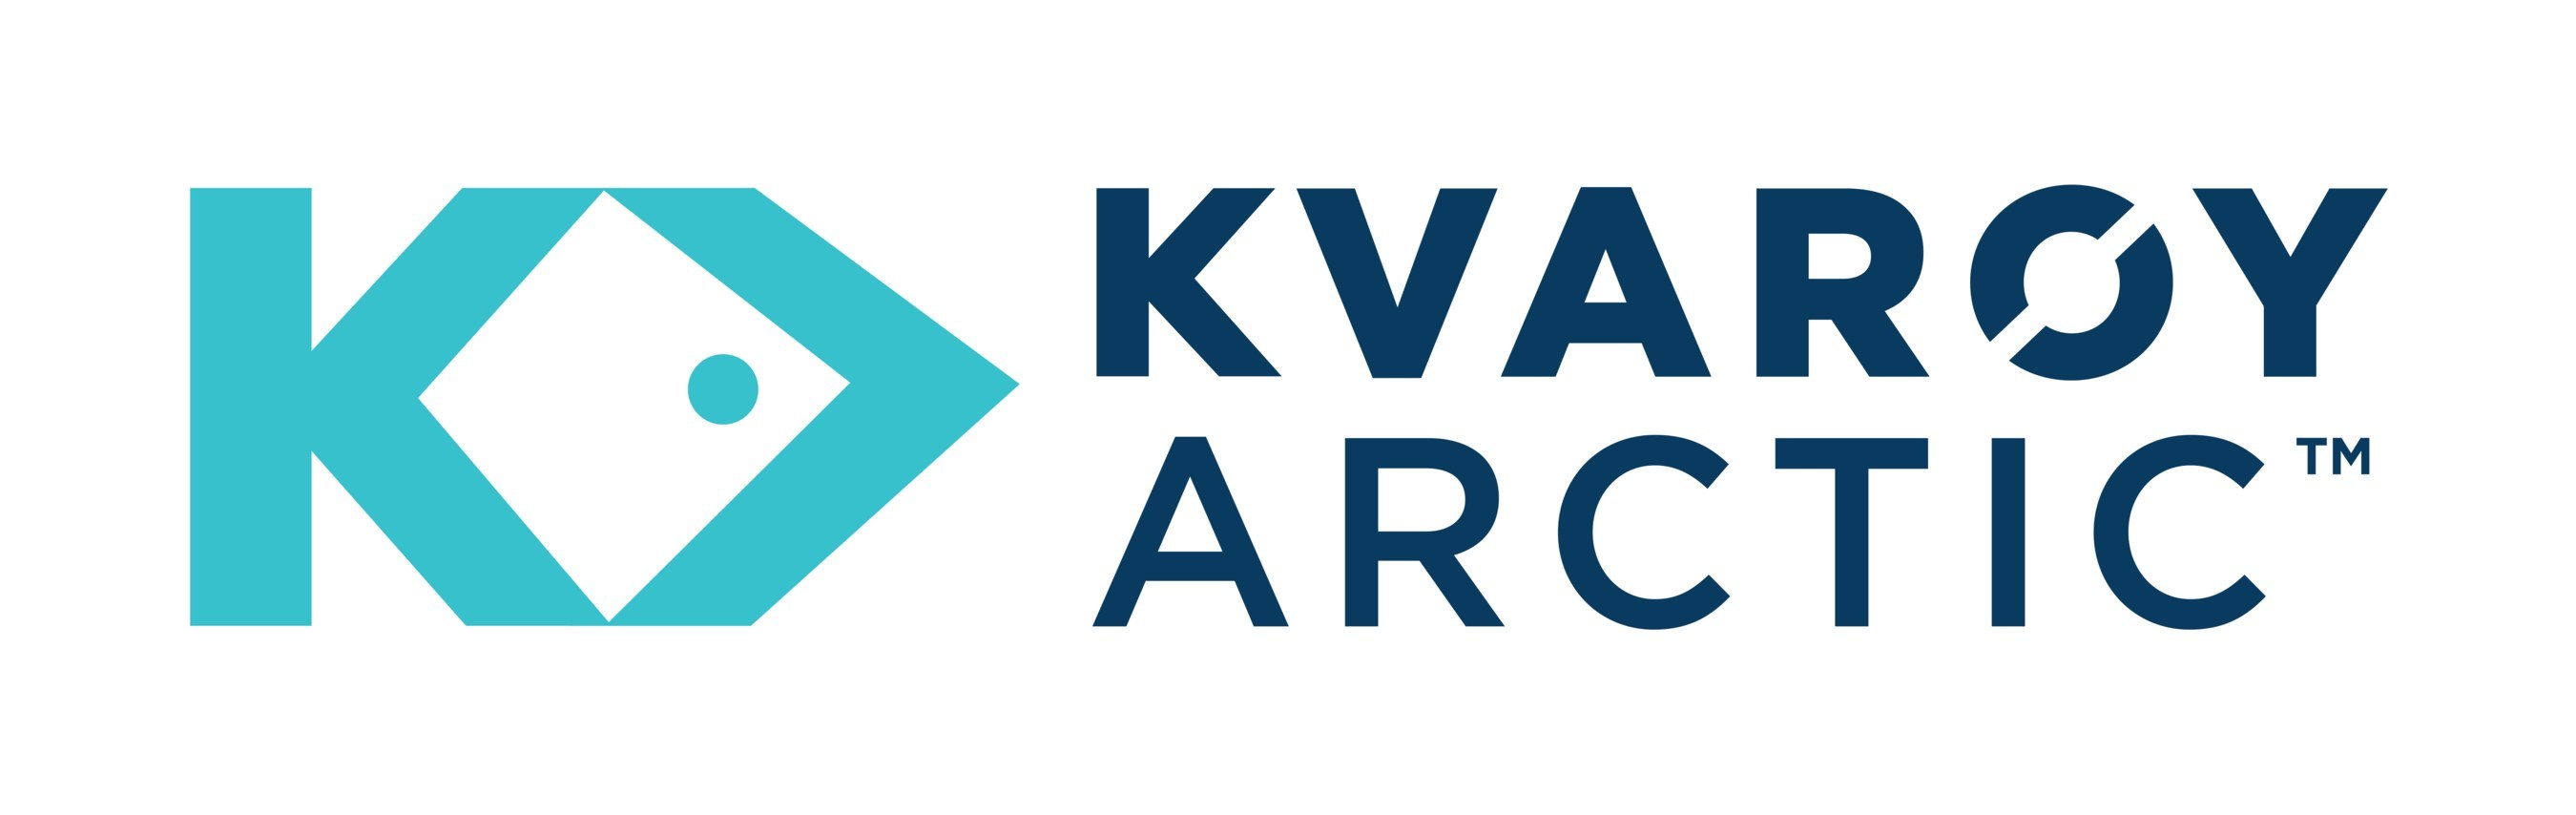 Kvarøy Arctic Recognized By Fast Company Magazine’s 2021 World Changing Ideas Awards